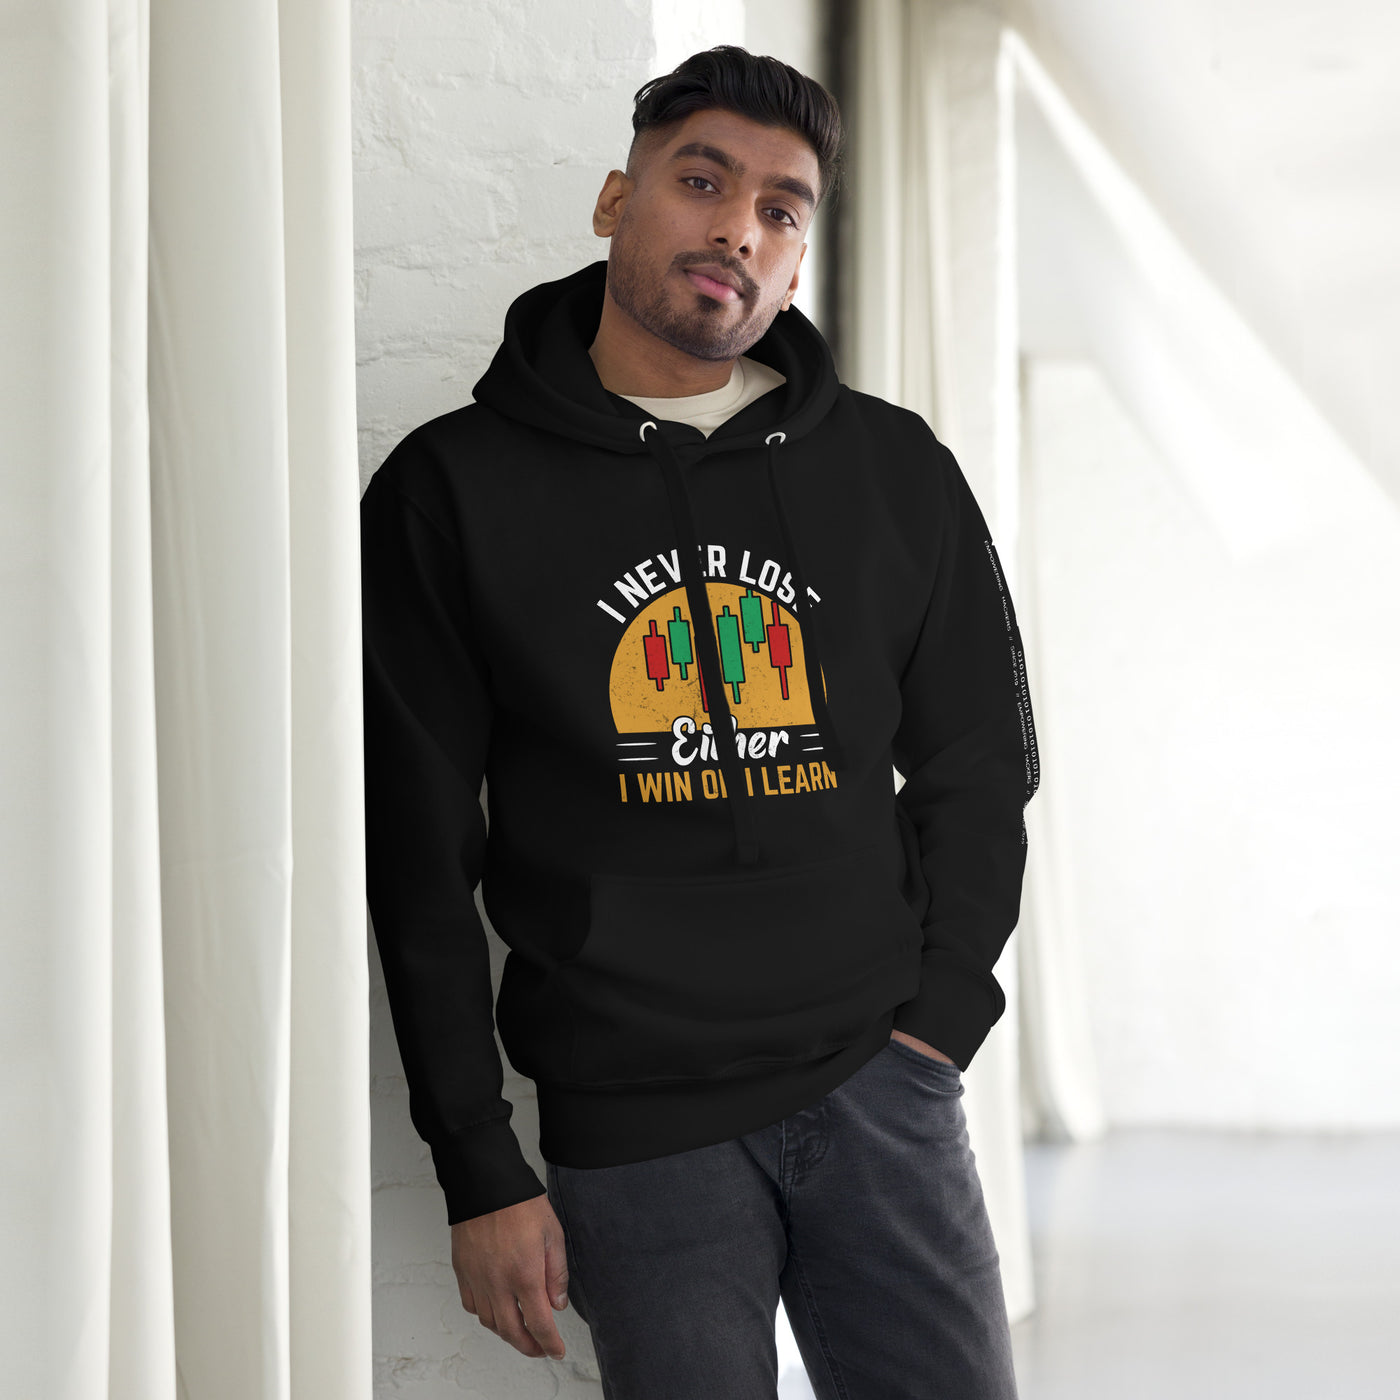 I never Lose: Either I win or I learn V1 - Unisex Hoodie